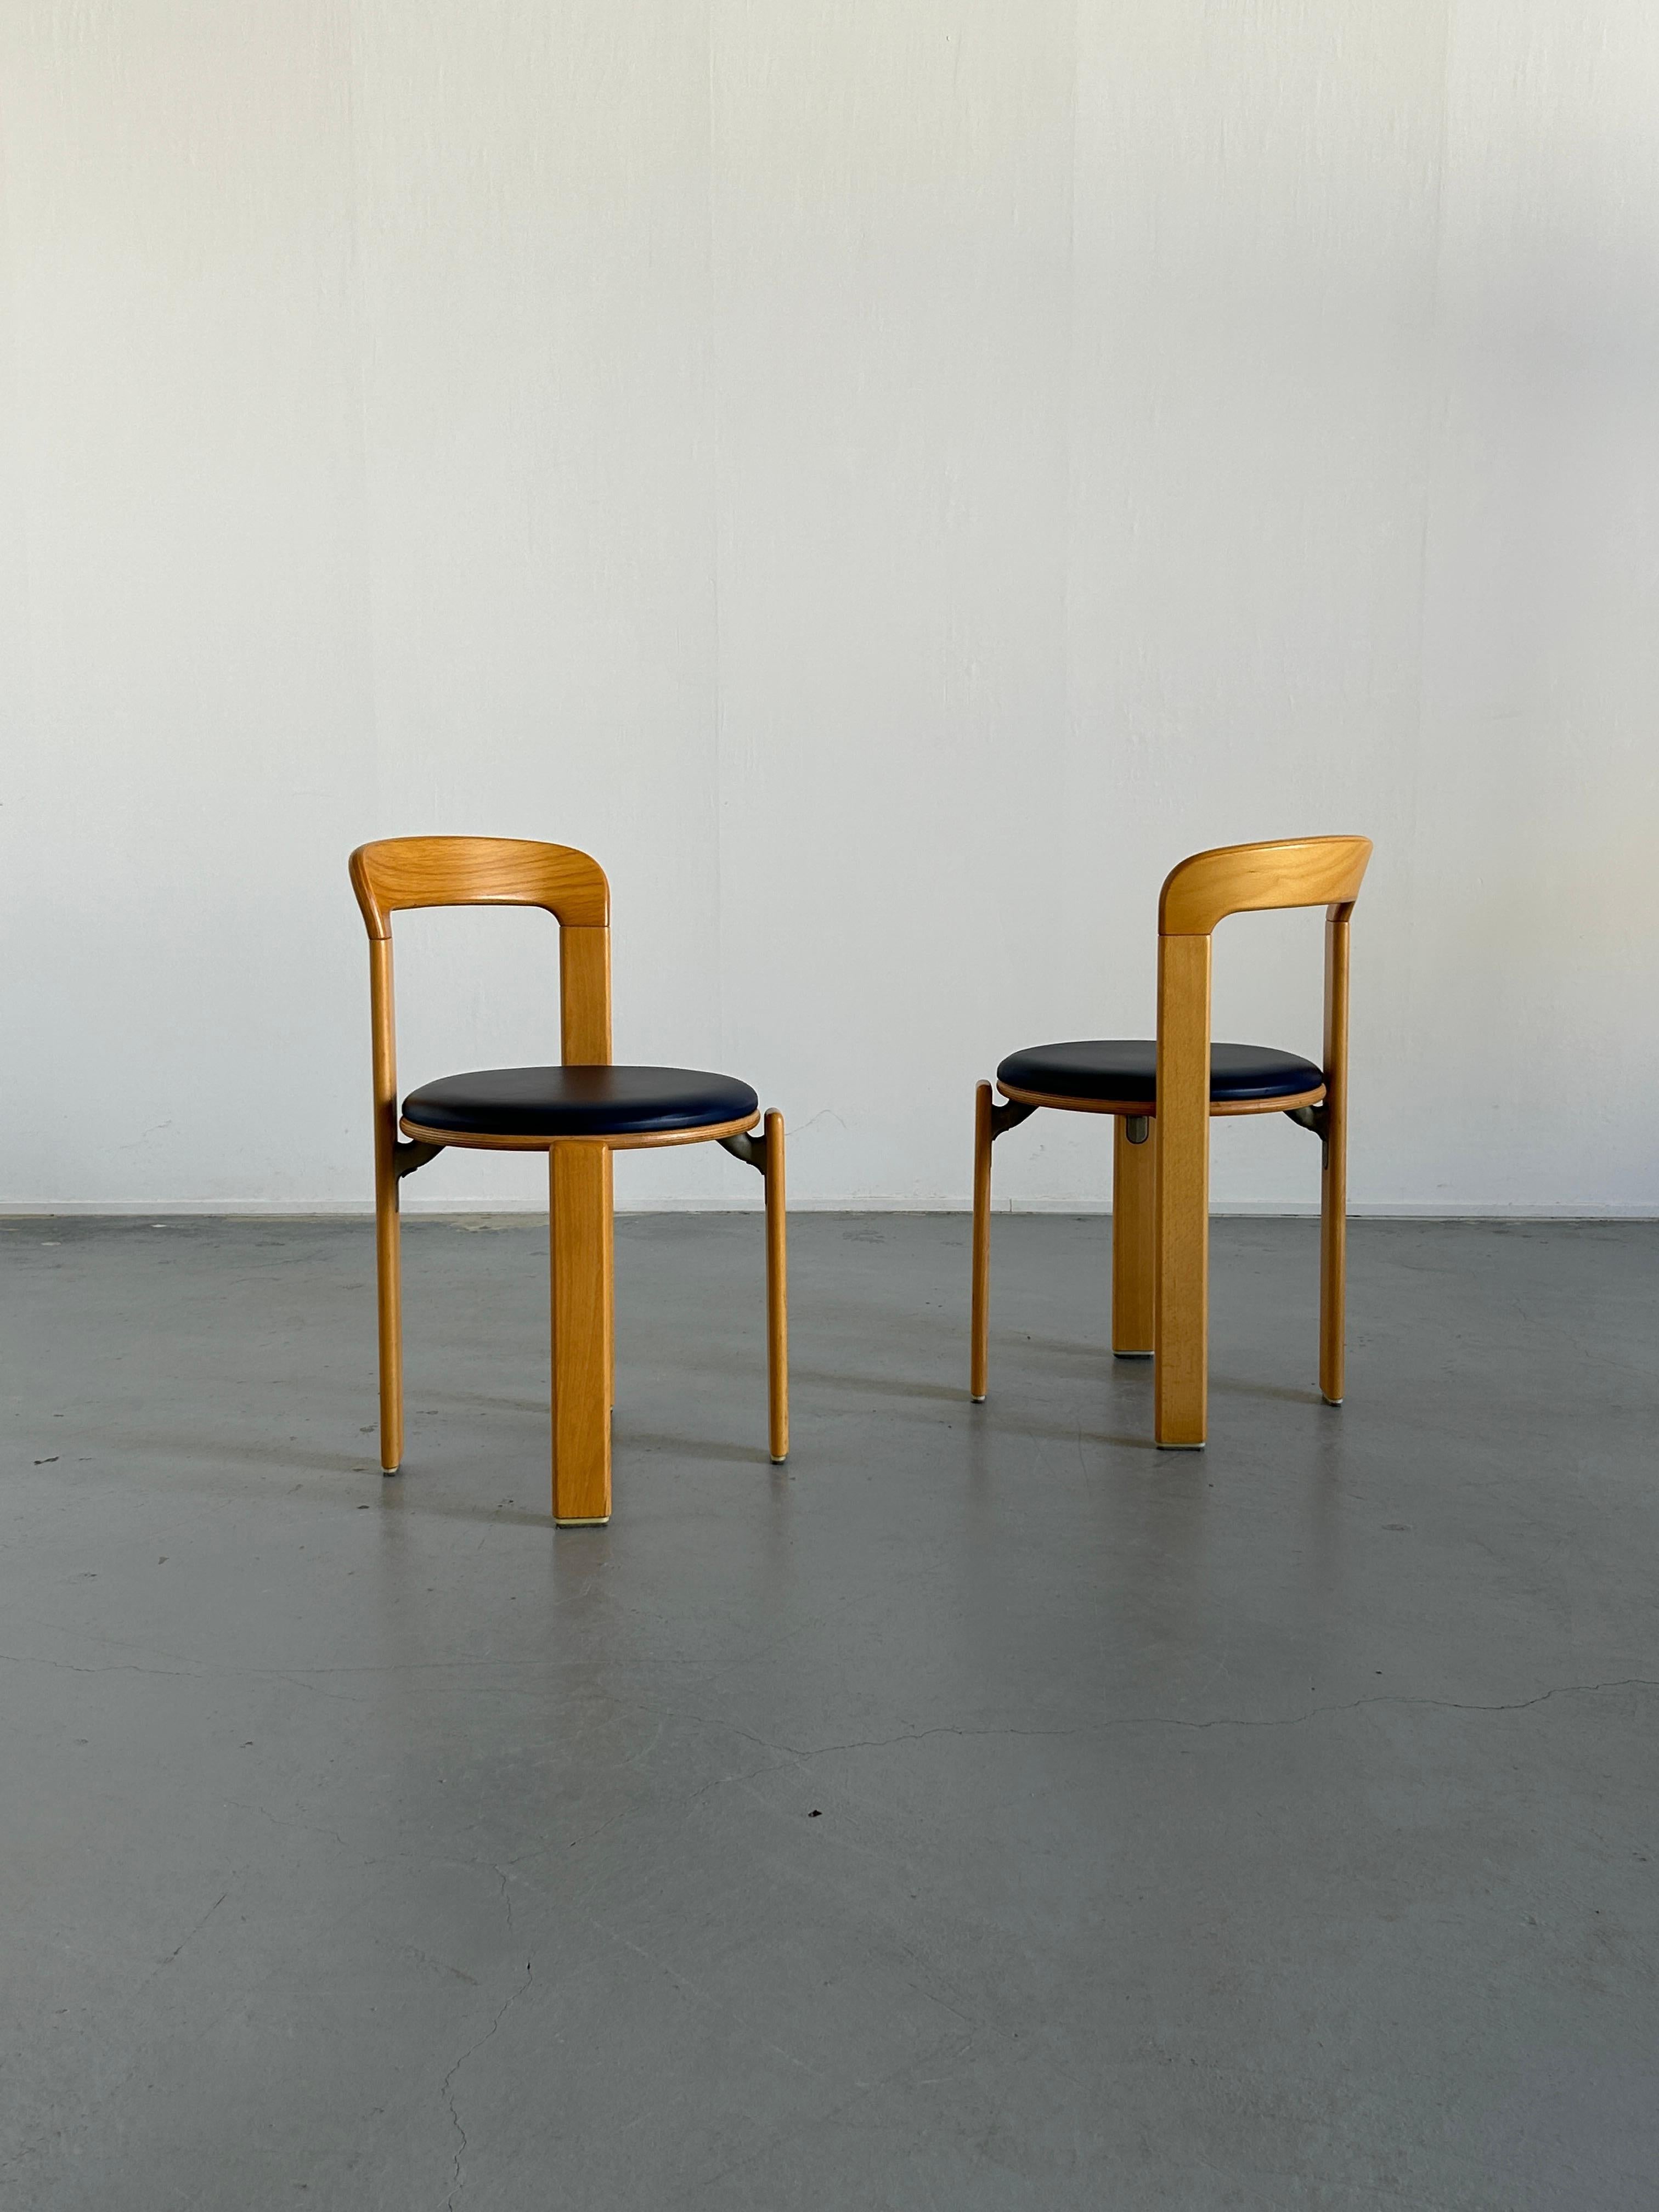 Pair of Mid-Century-Modern dining chairs designed by Bruno Rey in the 1970s. 
Iconic design, produced by the well known Germany manufacturer Kusch+Co in the early 1990s..

The dining chairs were made of solid beech, laminated plywood beech and cast